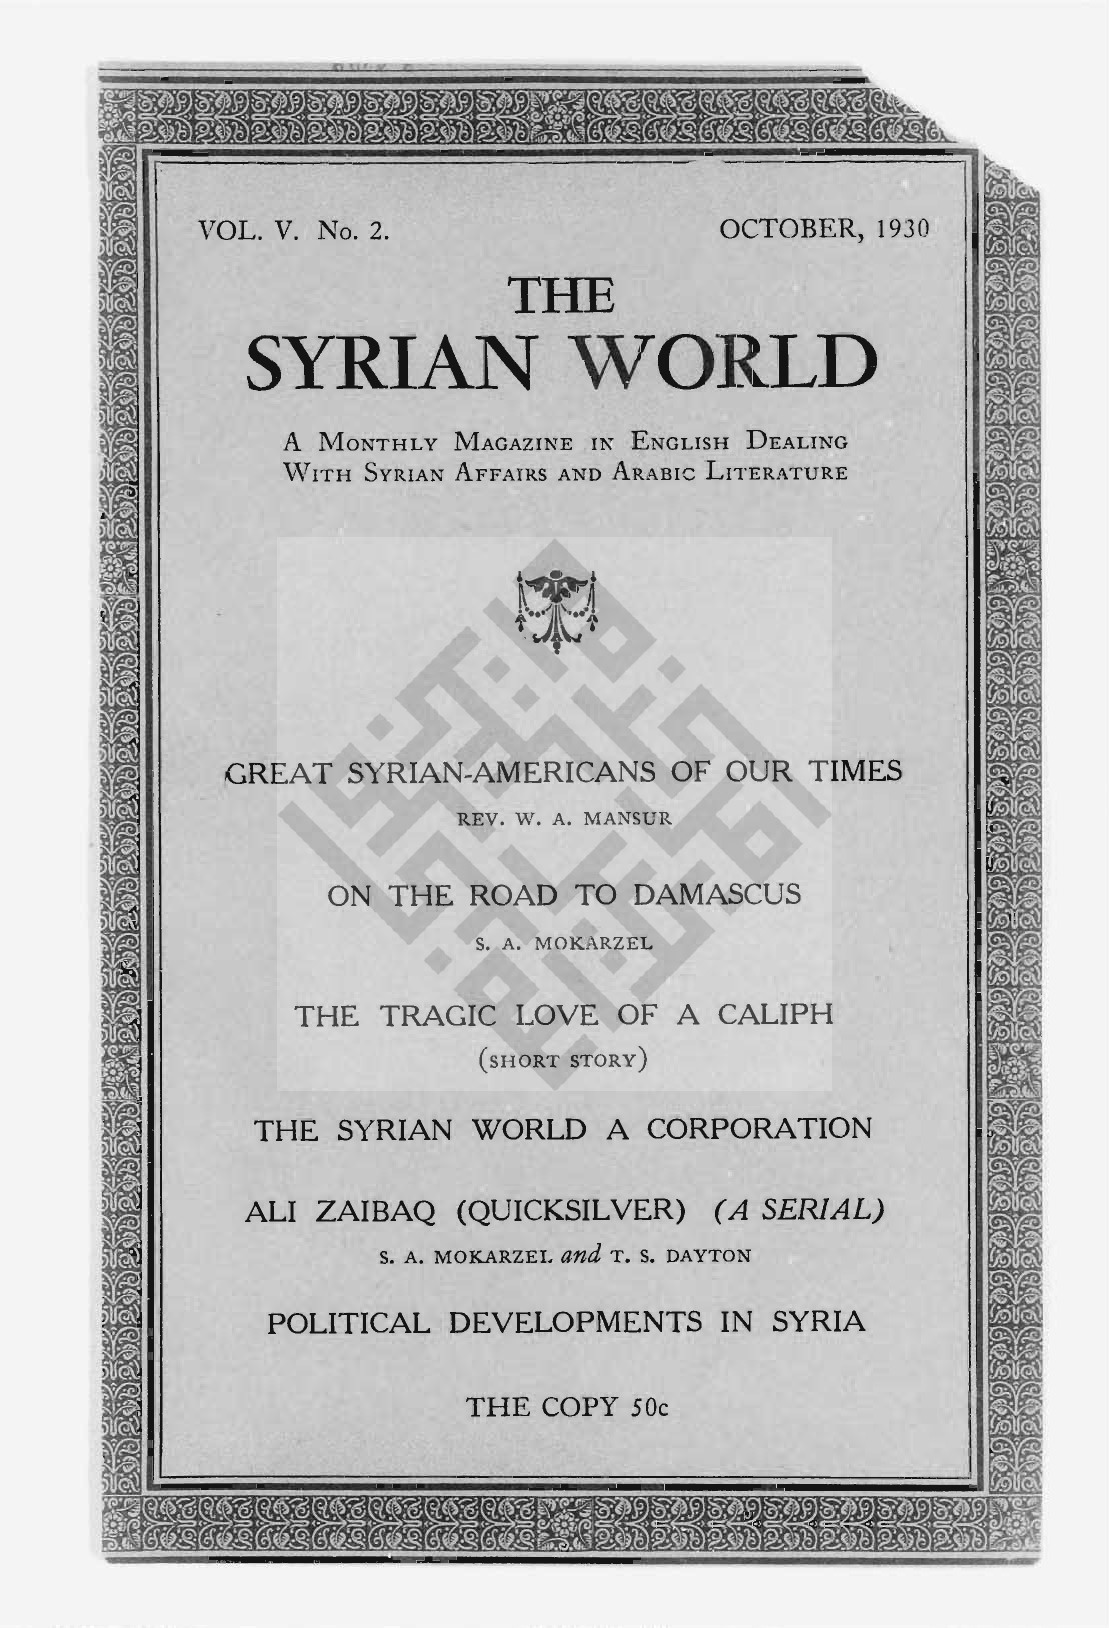 On Giving and Taking, The Syrian World, 5, 2, October 1930, p. 38